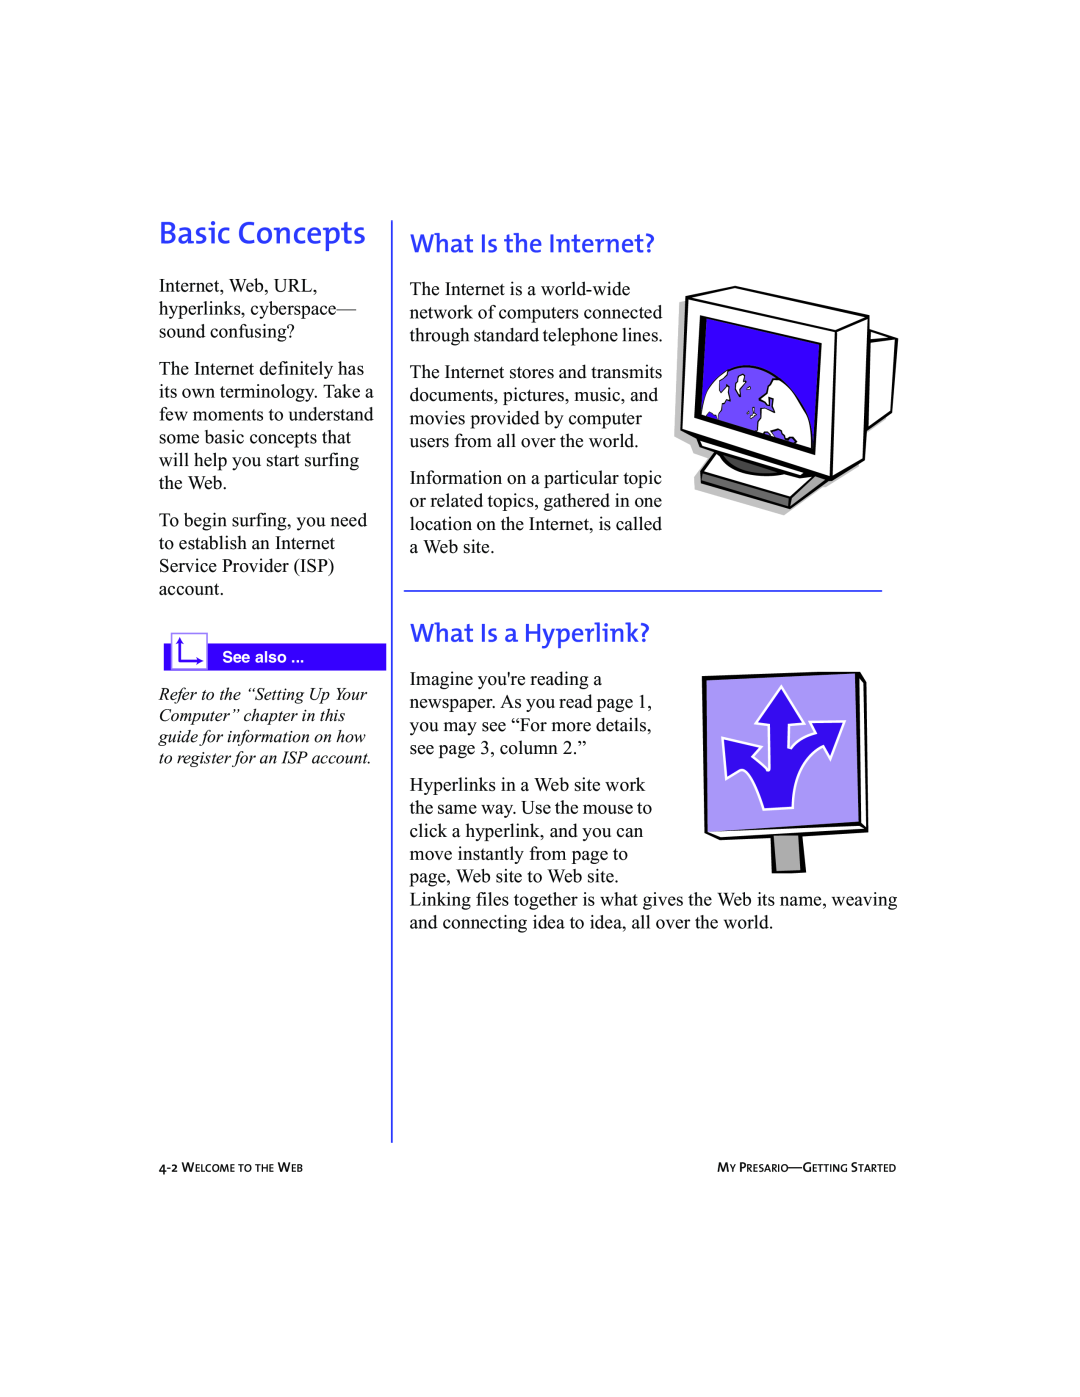 Compaq 5BW474 manual Basic Concepts, What Is the Internet?, What Is a Hyperlink? 